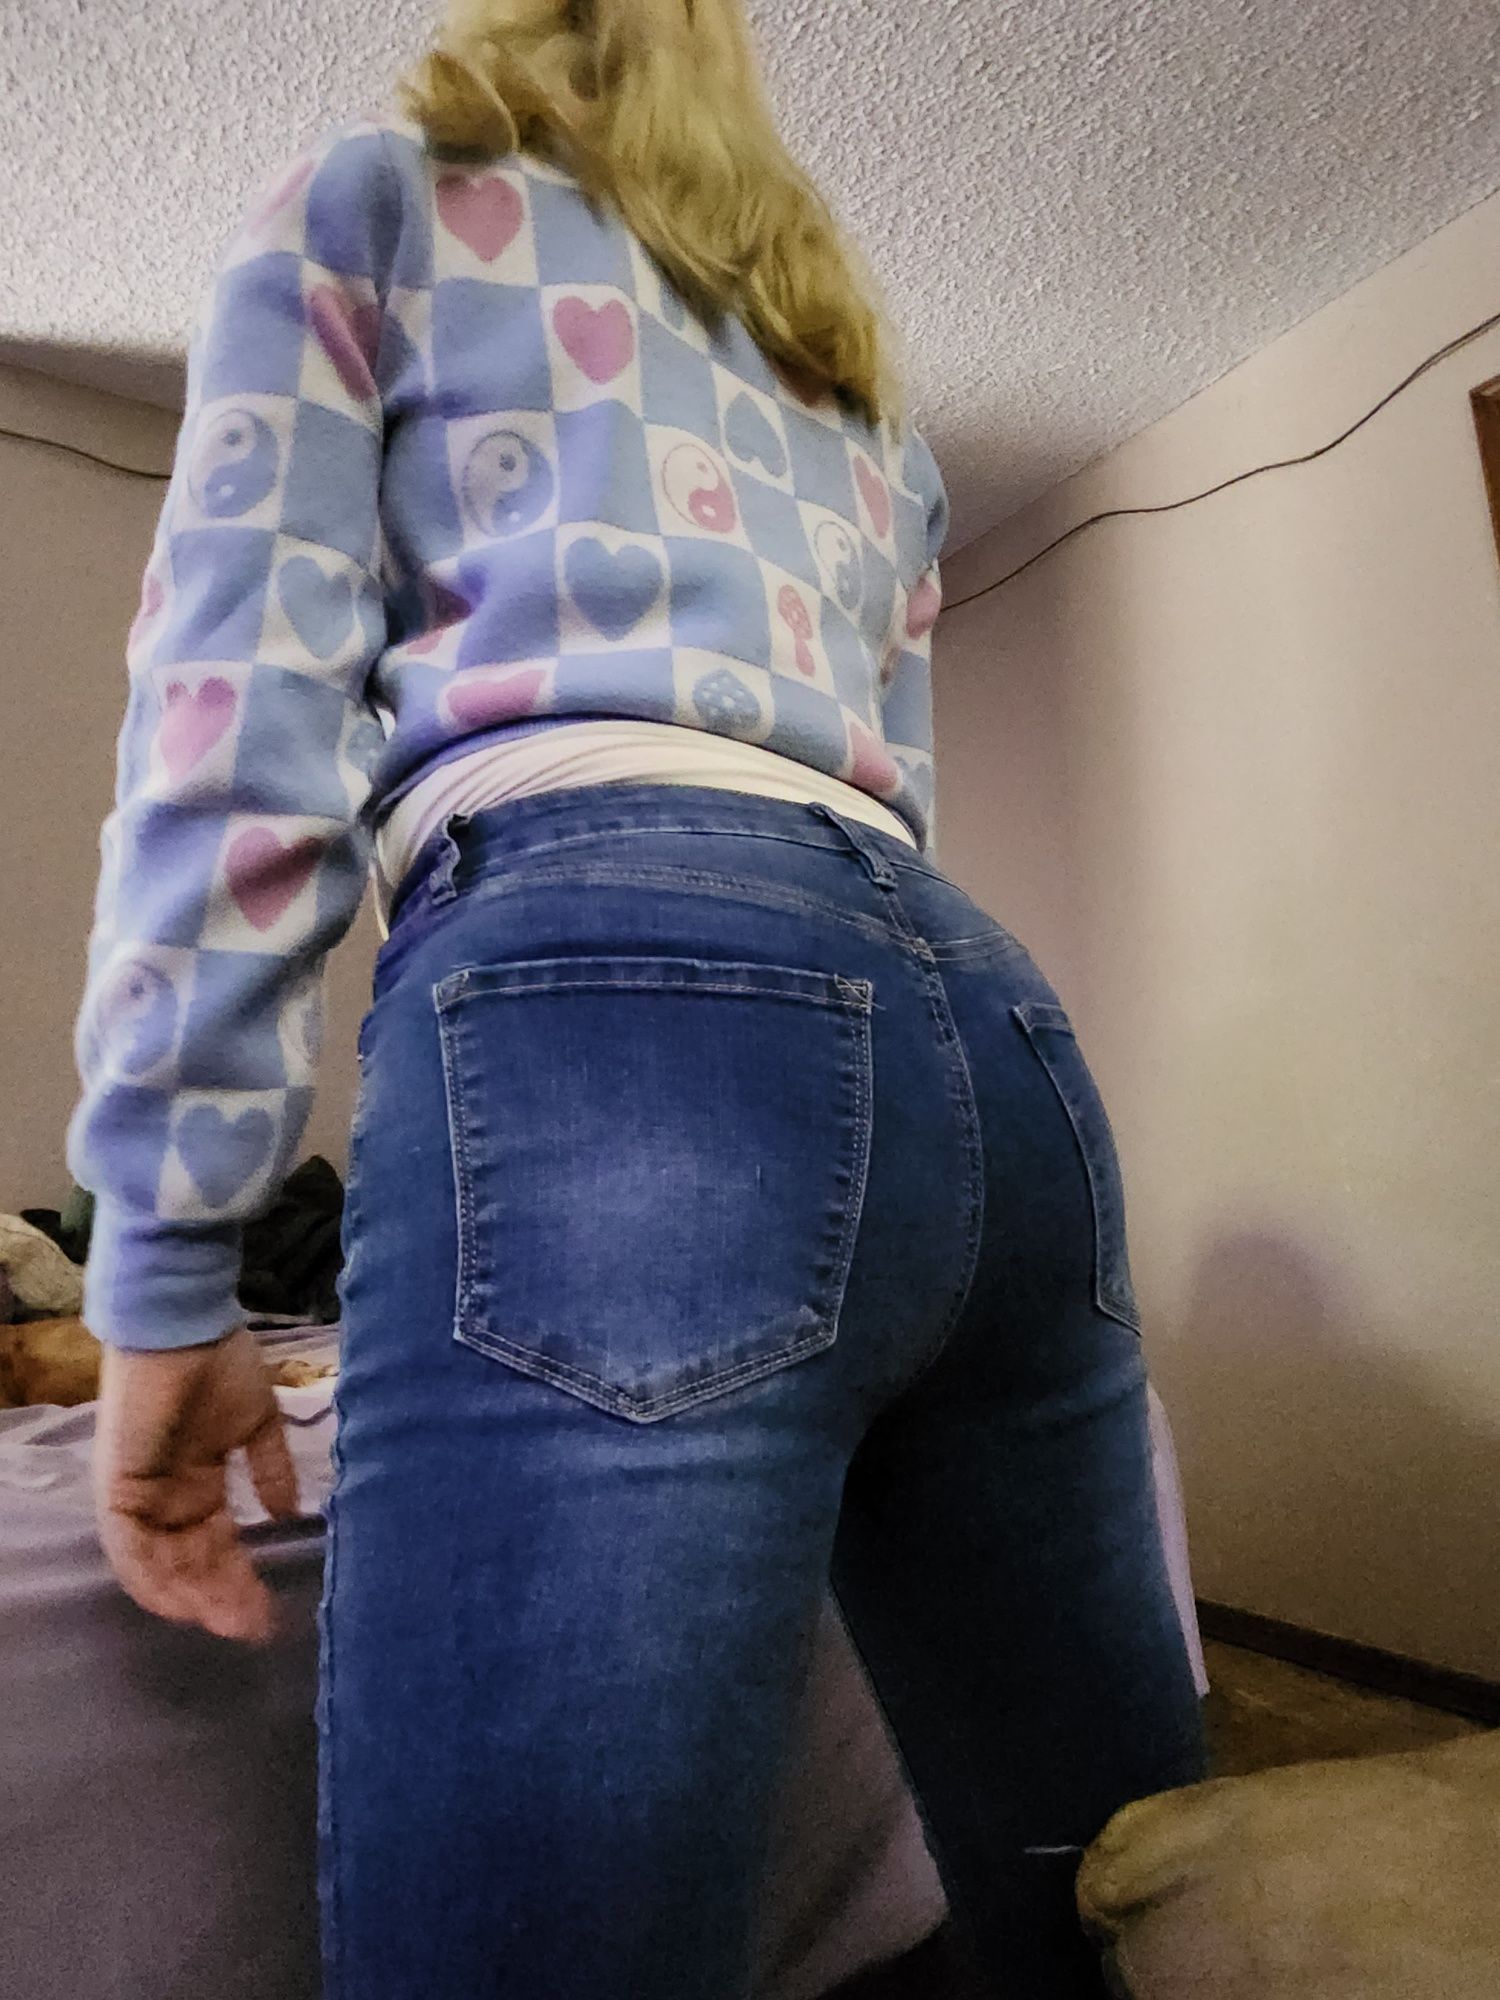 Bodysuits and Jeans - Mama_Foxx94 #21